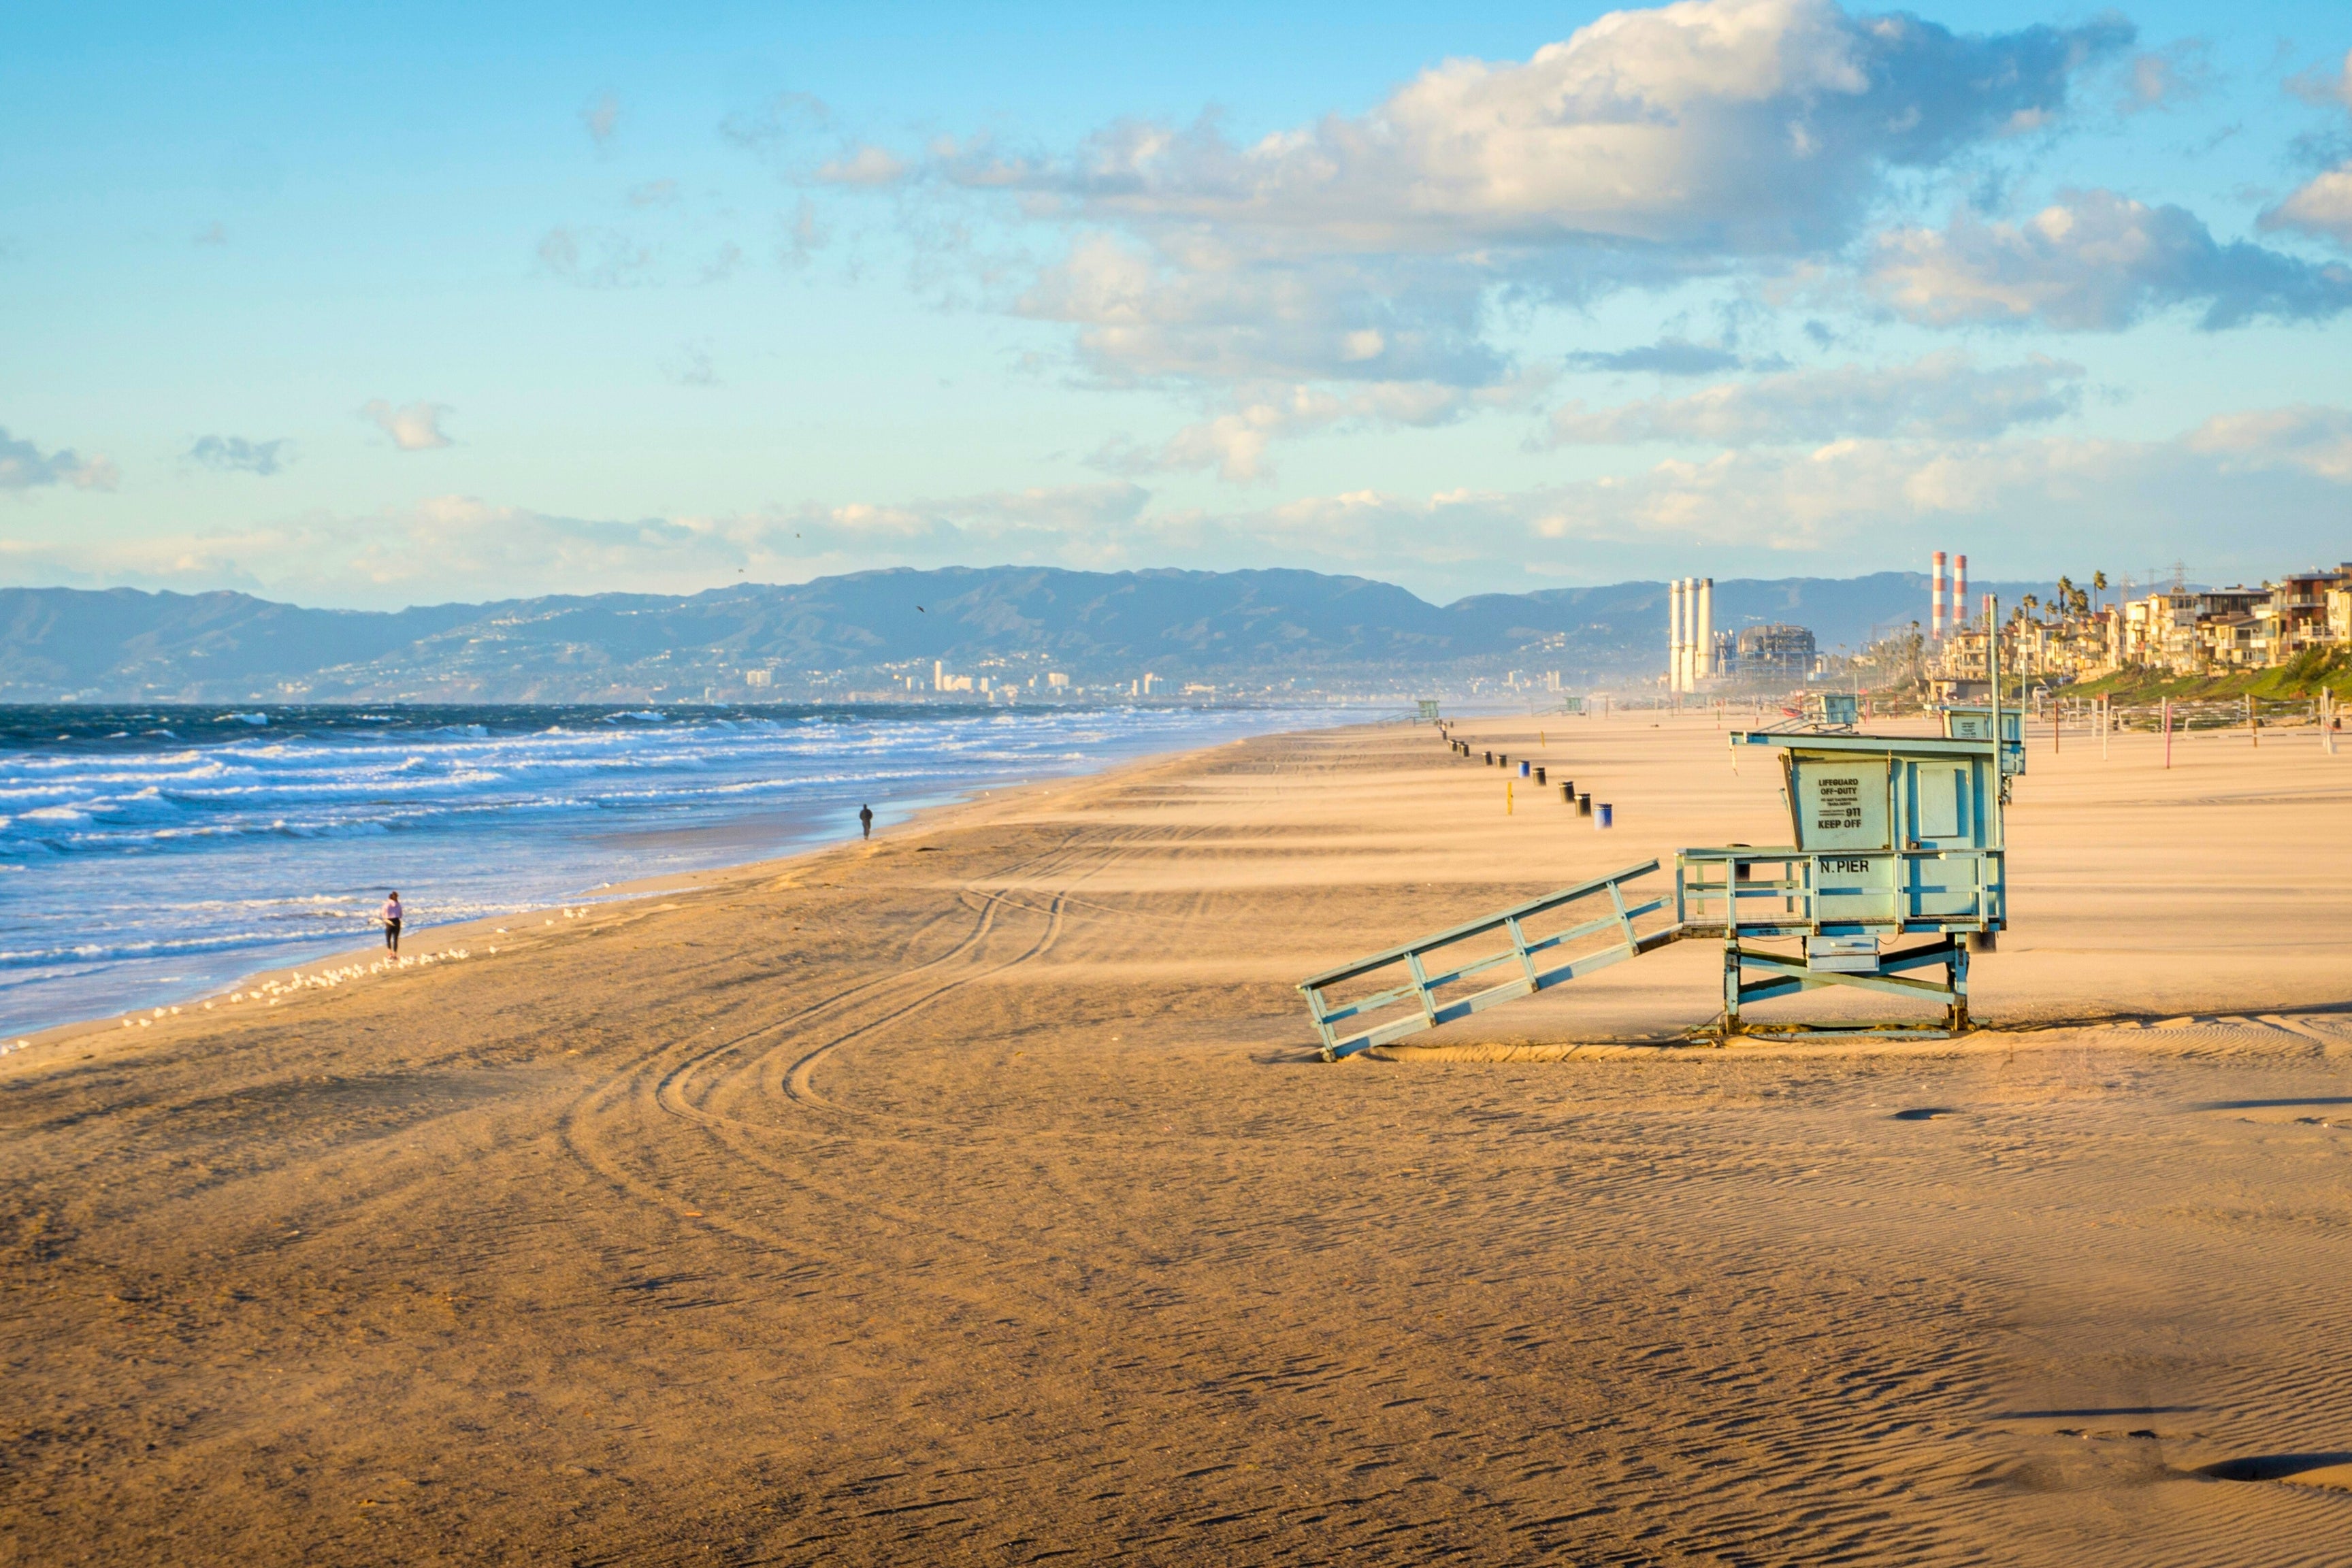 los angeles beach blue lifeguard post gold sand mountains